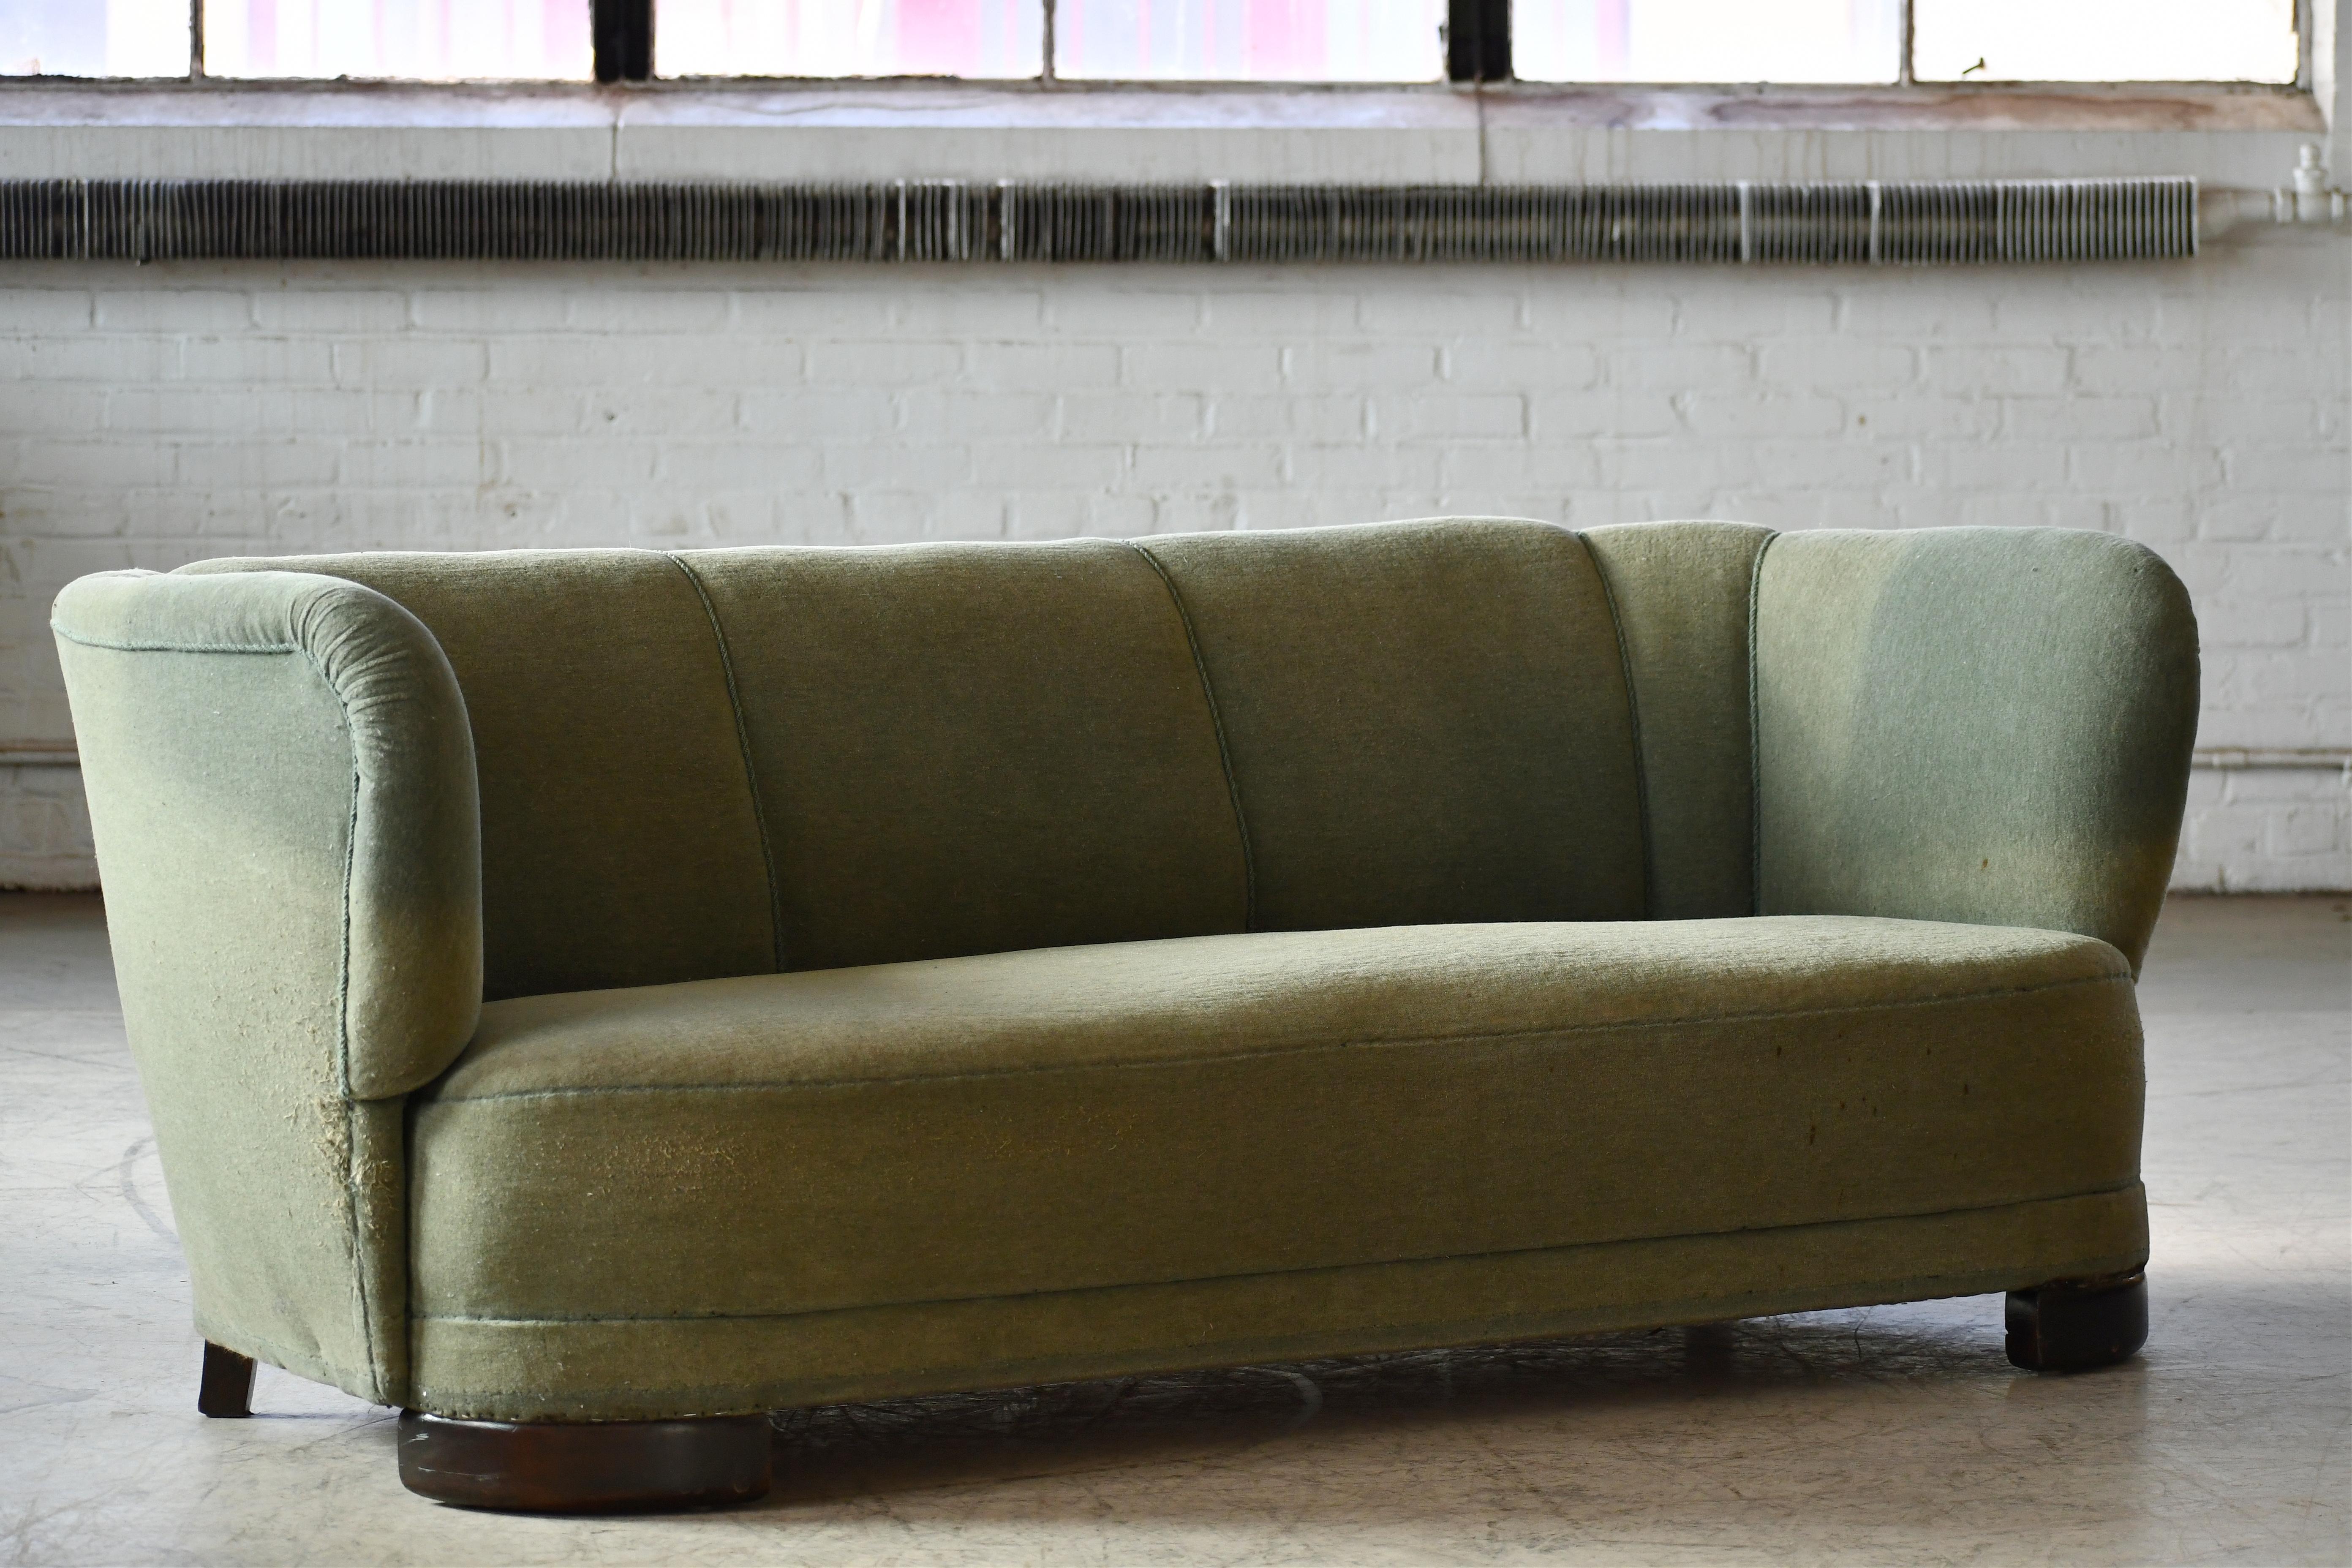 Danish 1940s Channel Back Banana Form Curved Sofa in Green Wool 1